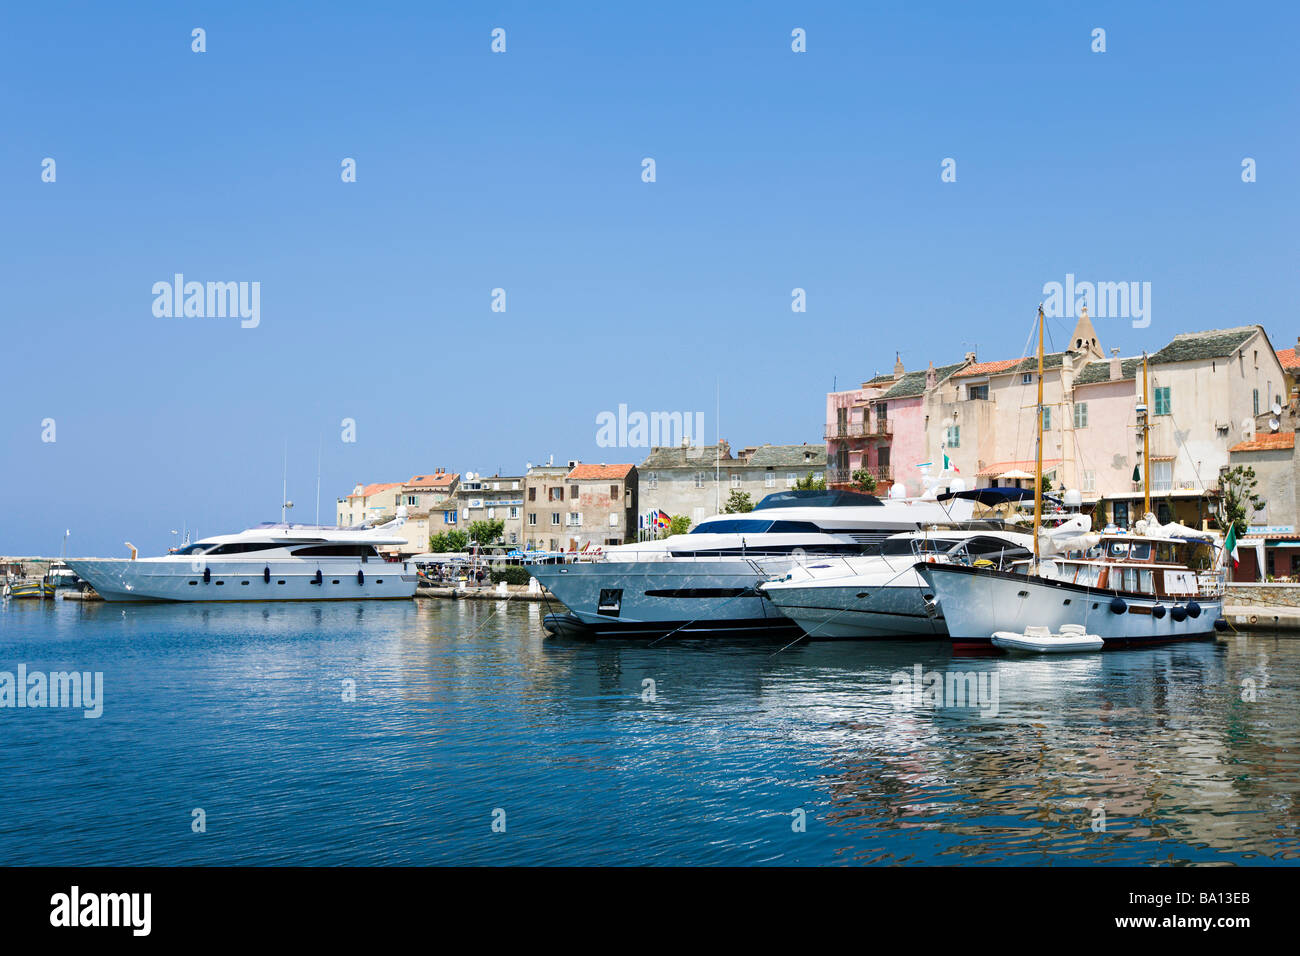 Luxury Yachts in the harbour at St Florent, The Nebbio, Corsica, France Stock Photo